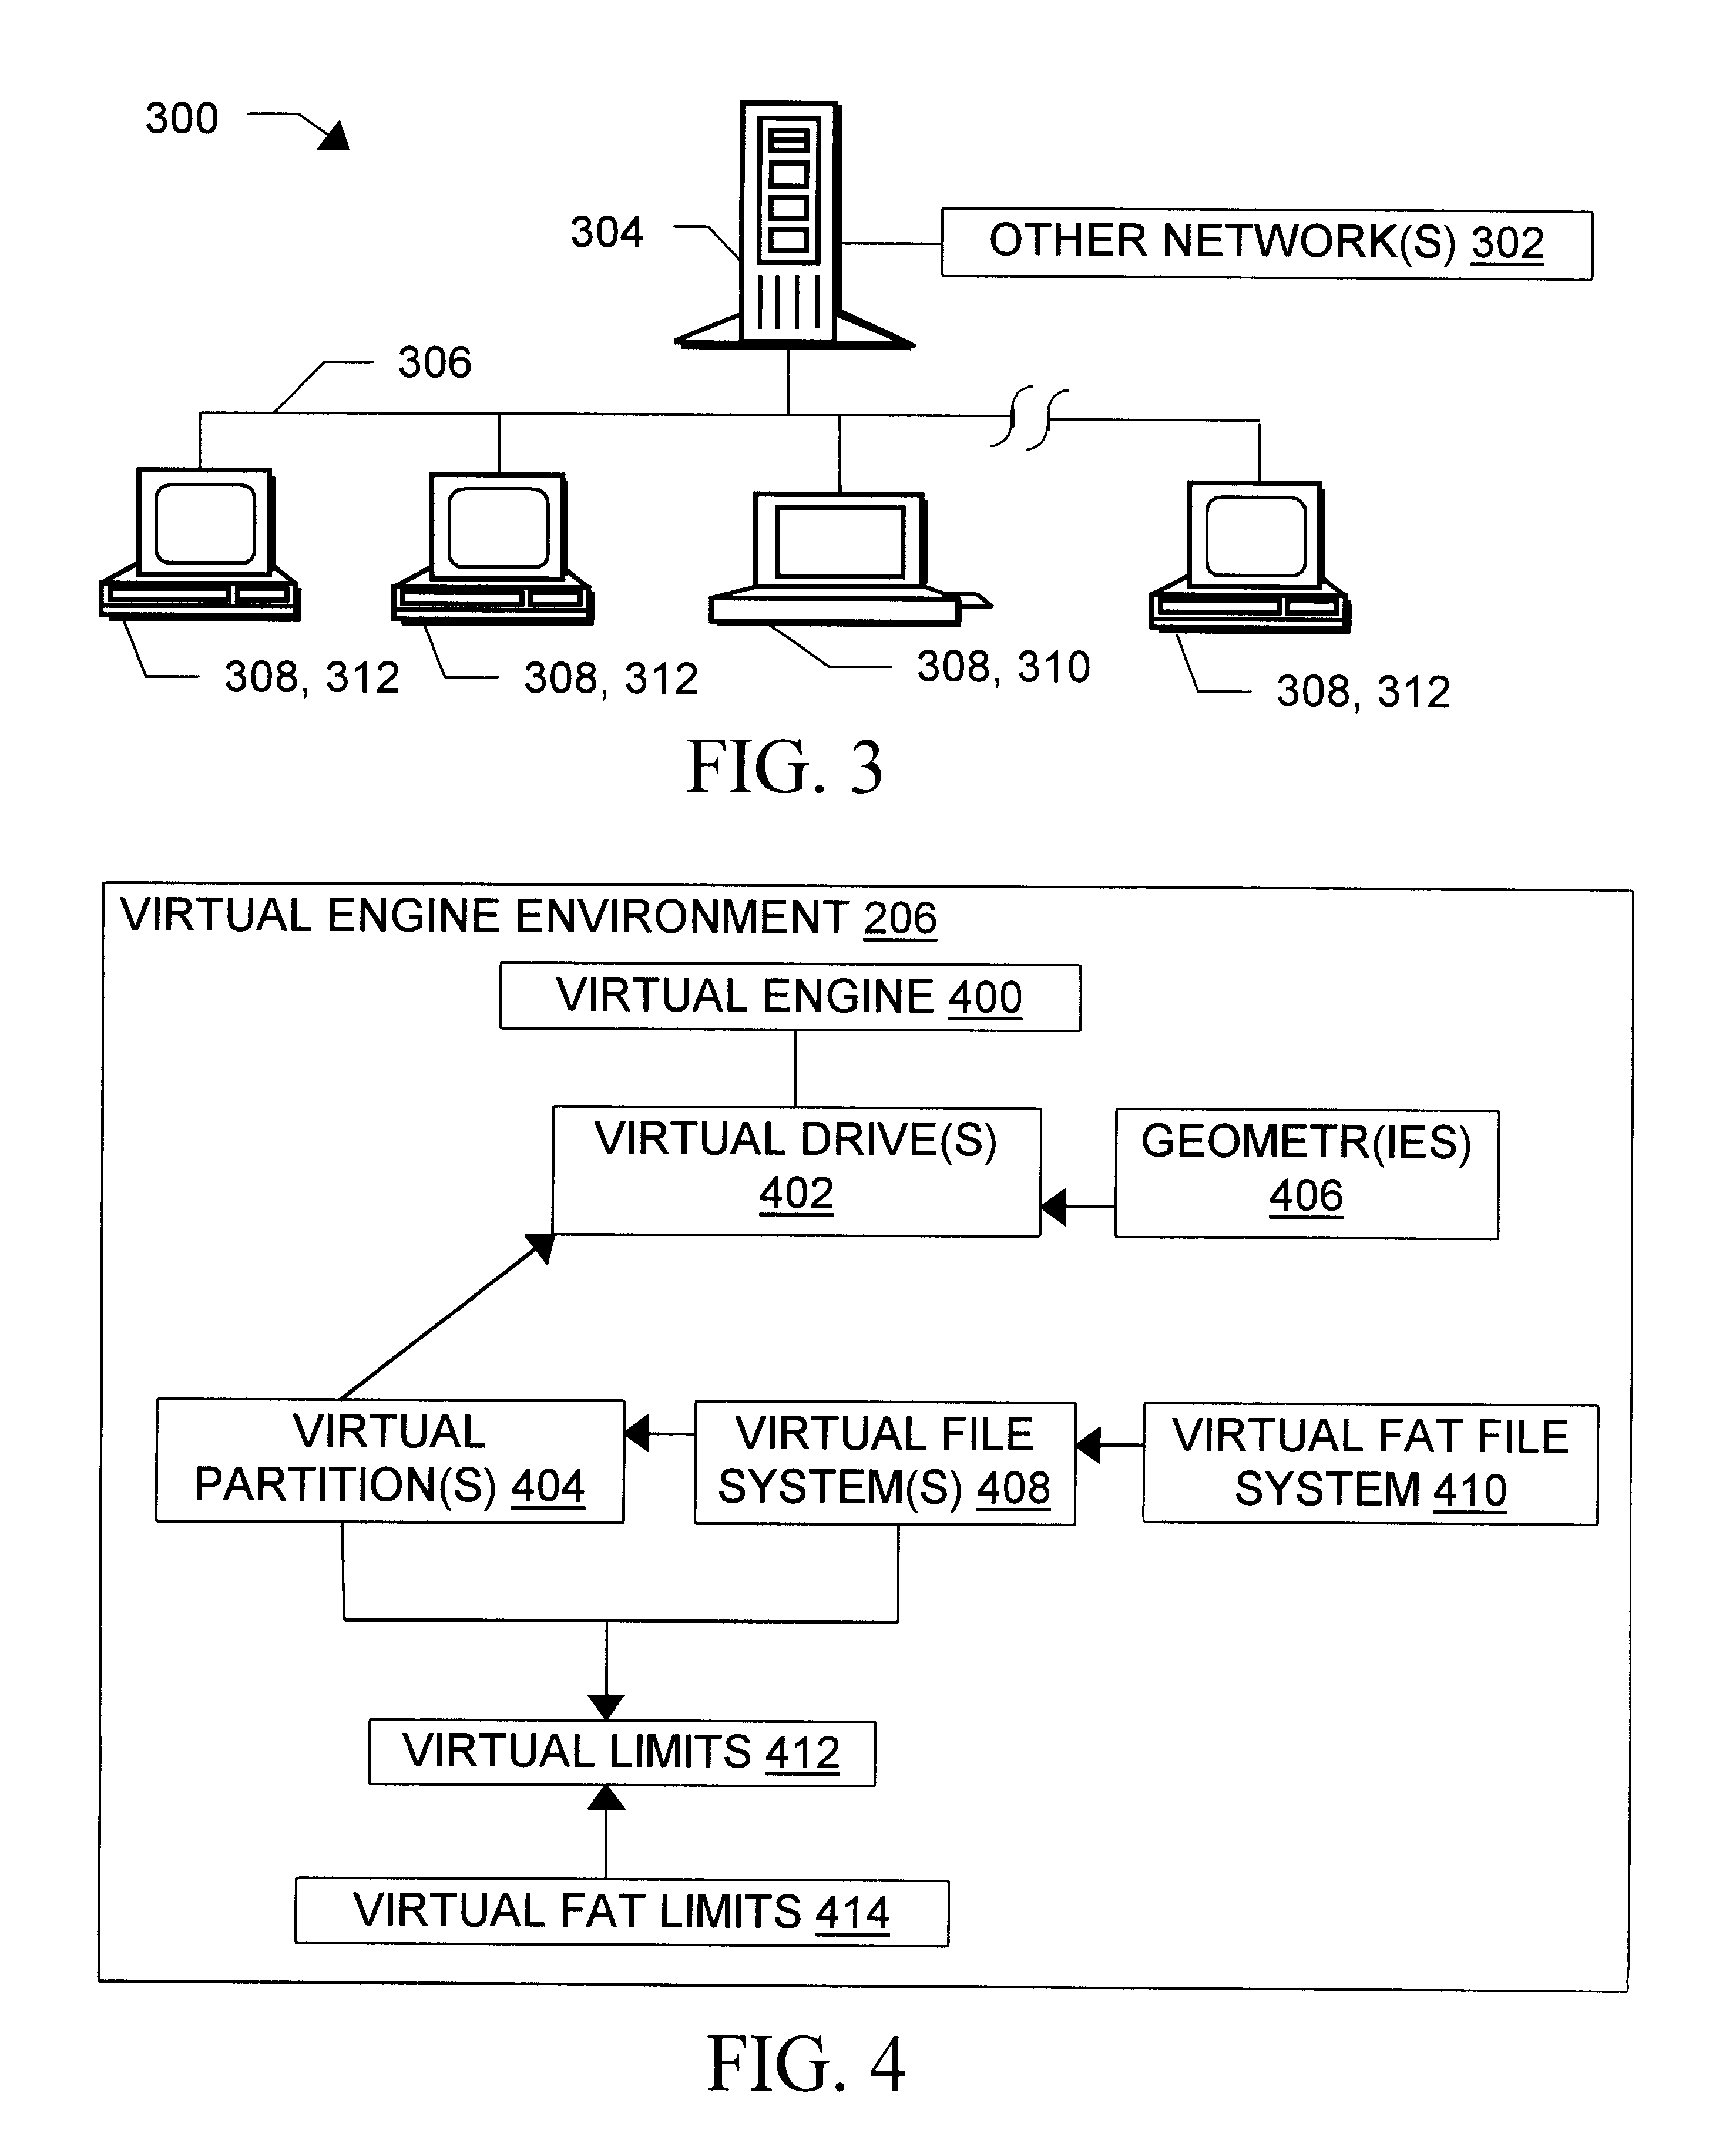 Manipulation of virtual and live computer storage device partitions